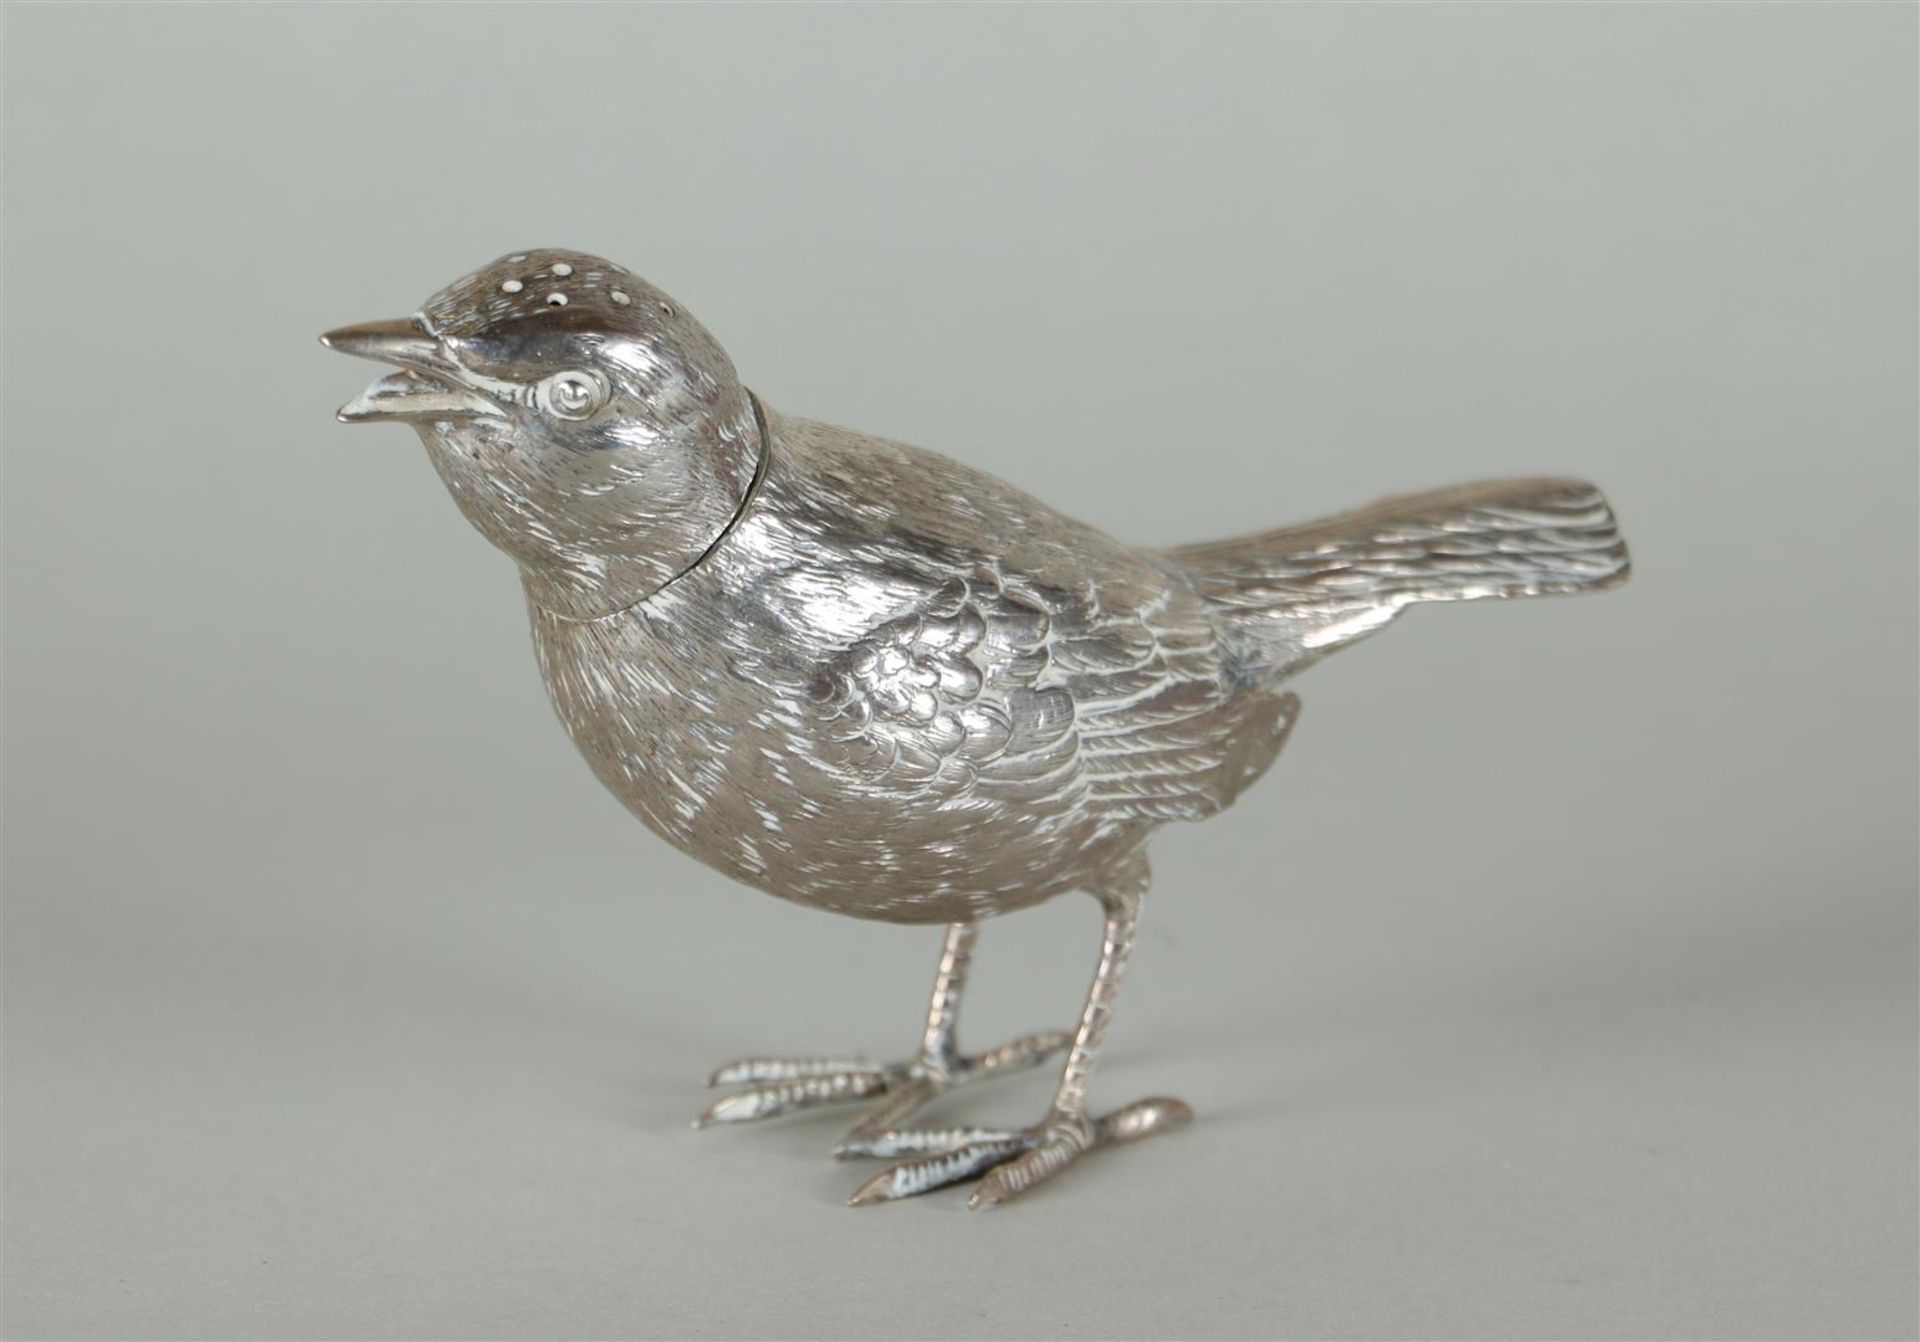 Silver table piece / spreader in the shape of a thrush - Image 3 of 7